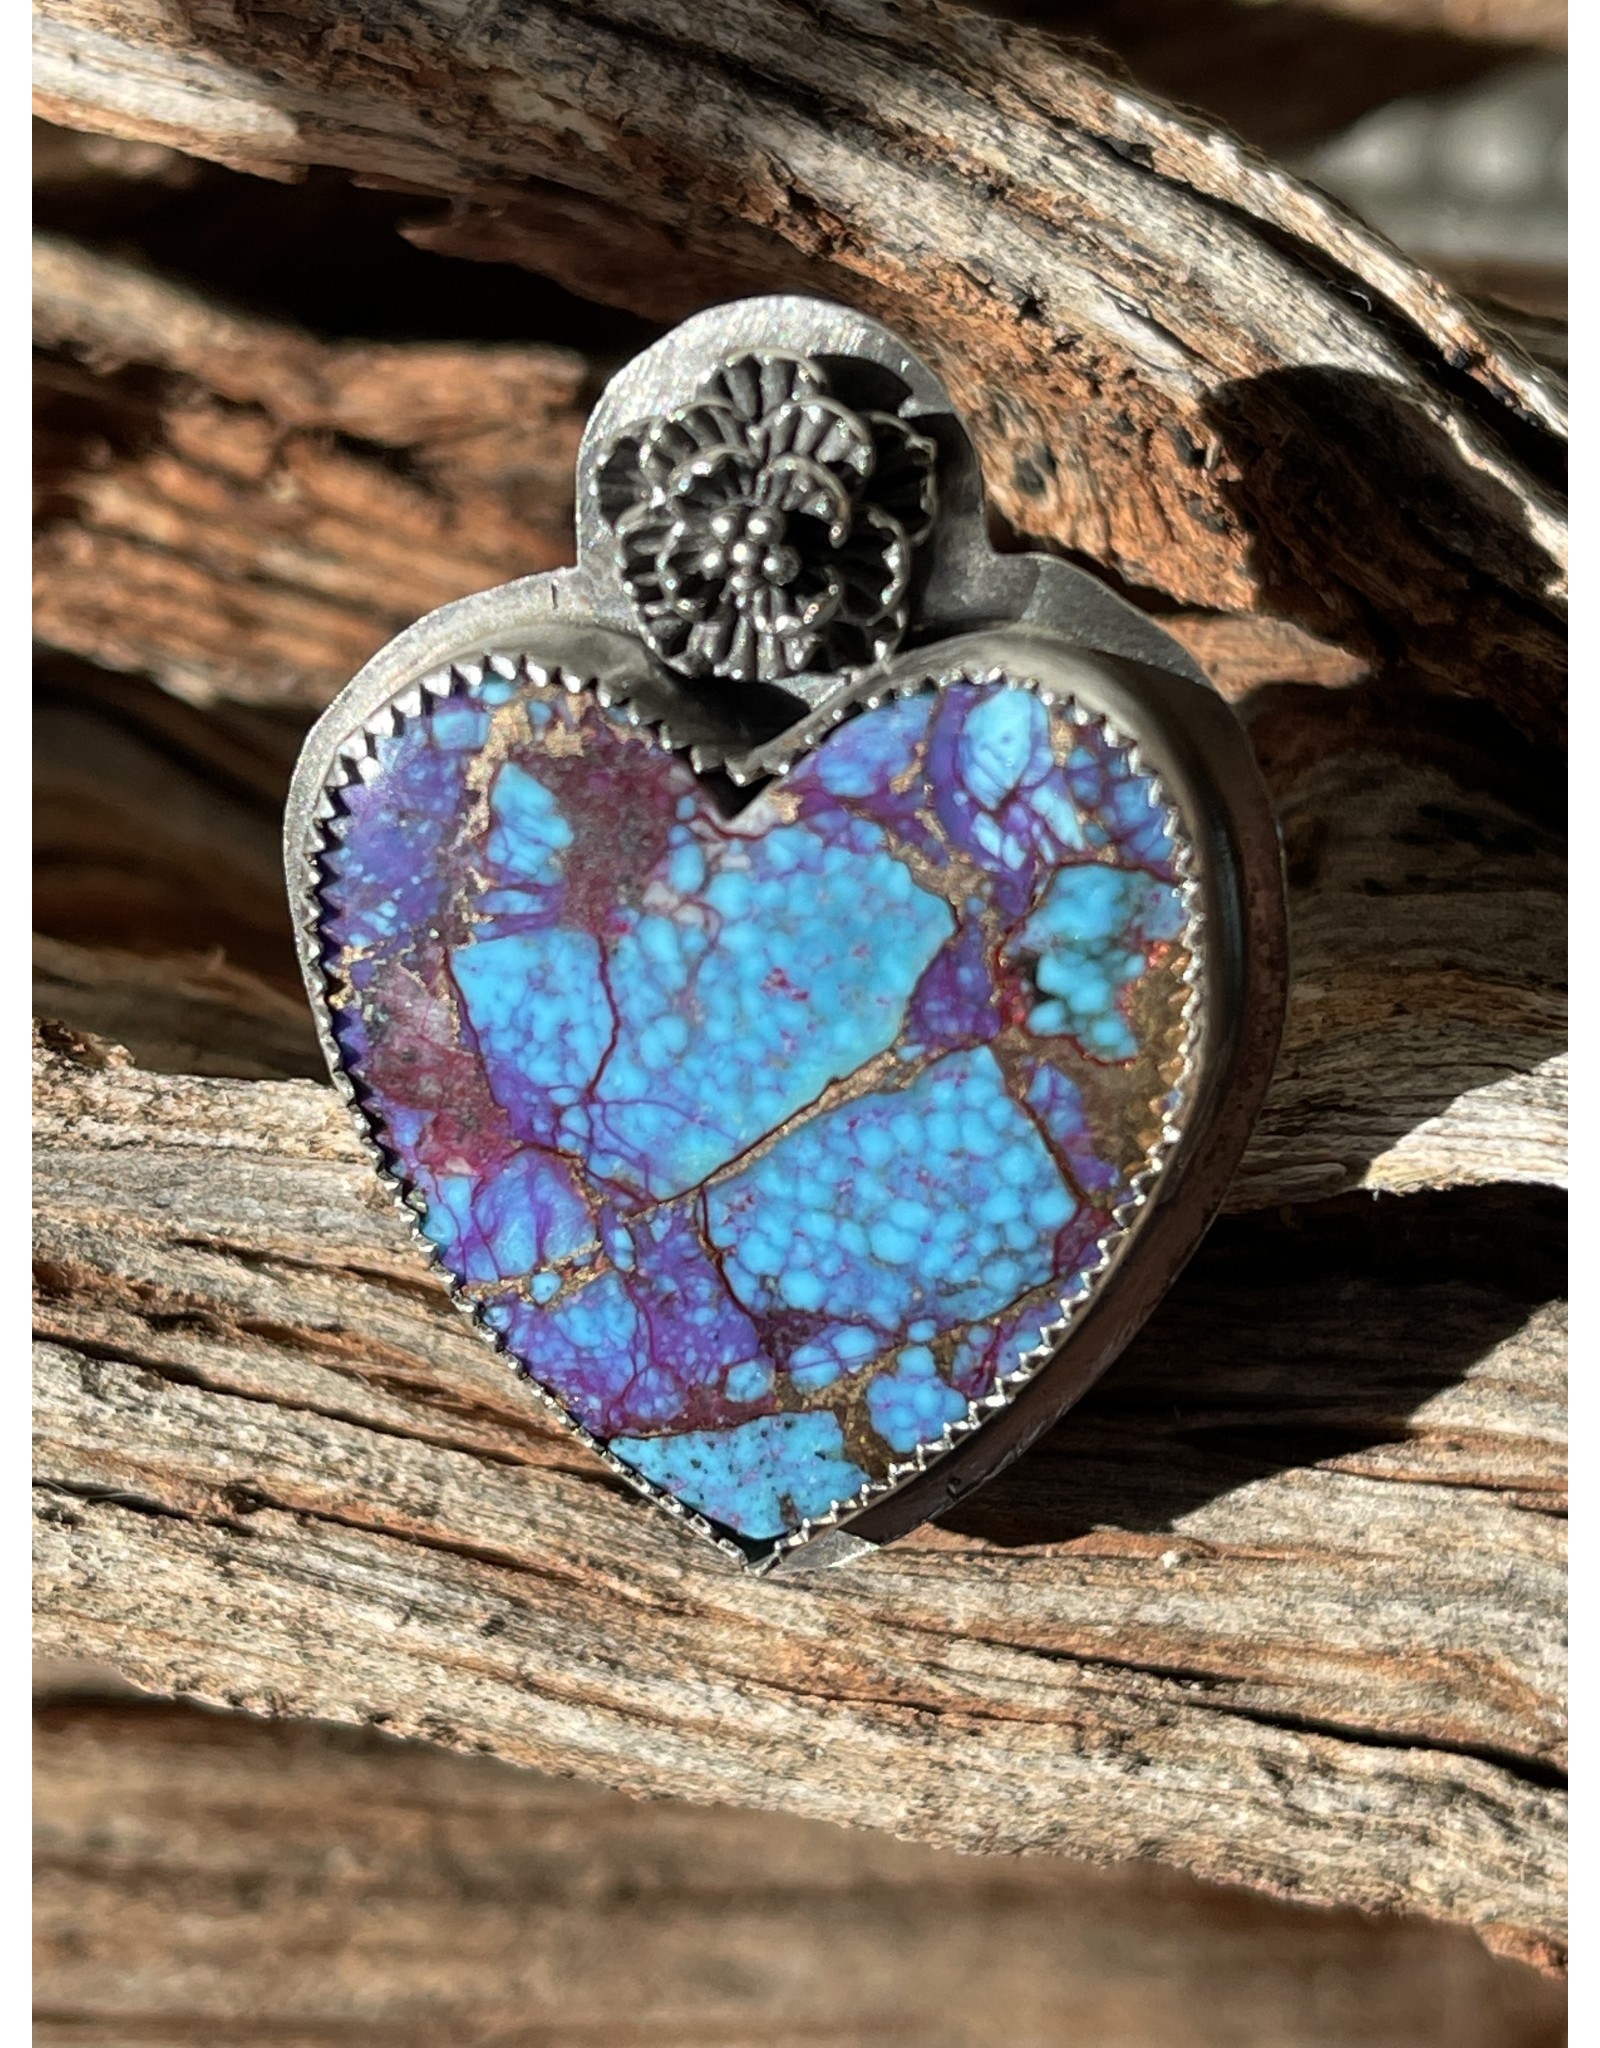 Annette Colby - Jeweler Mohave Kingman Turquoise Heart Flower Ring Size 7 - Annette Colby